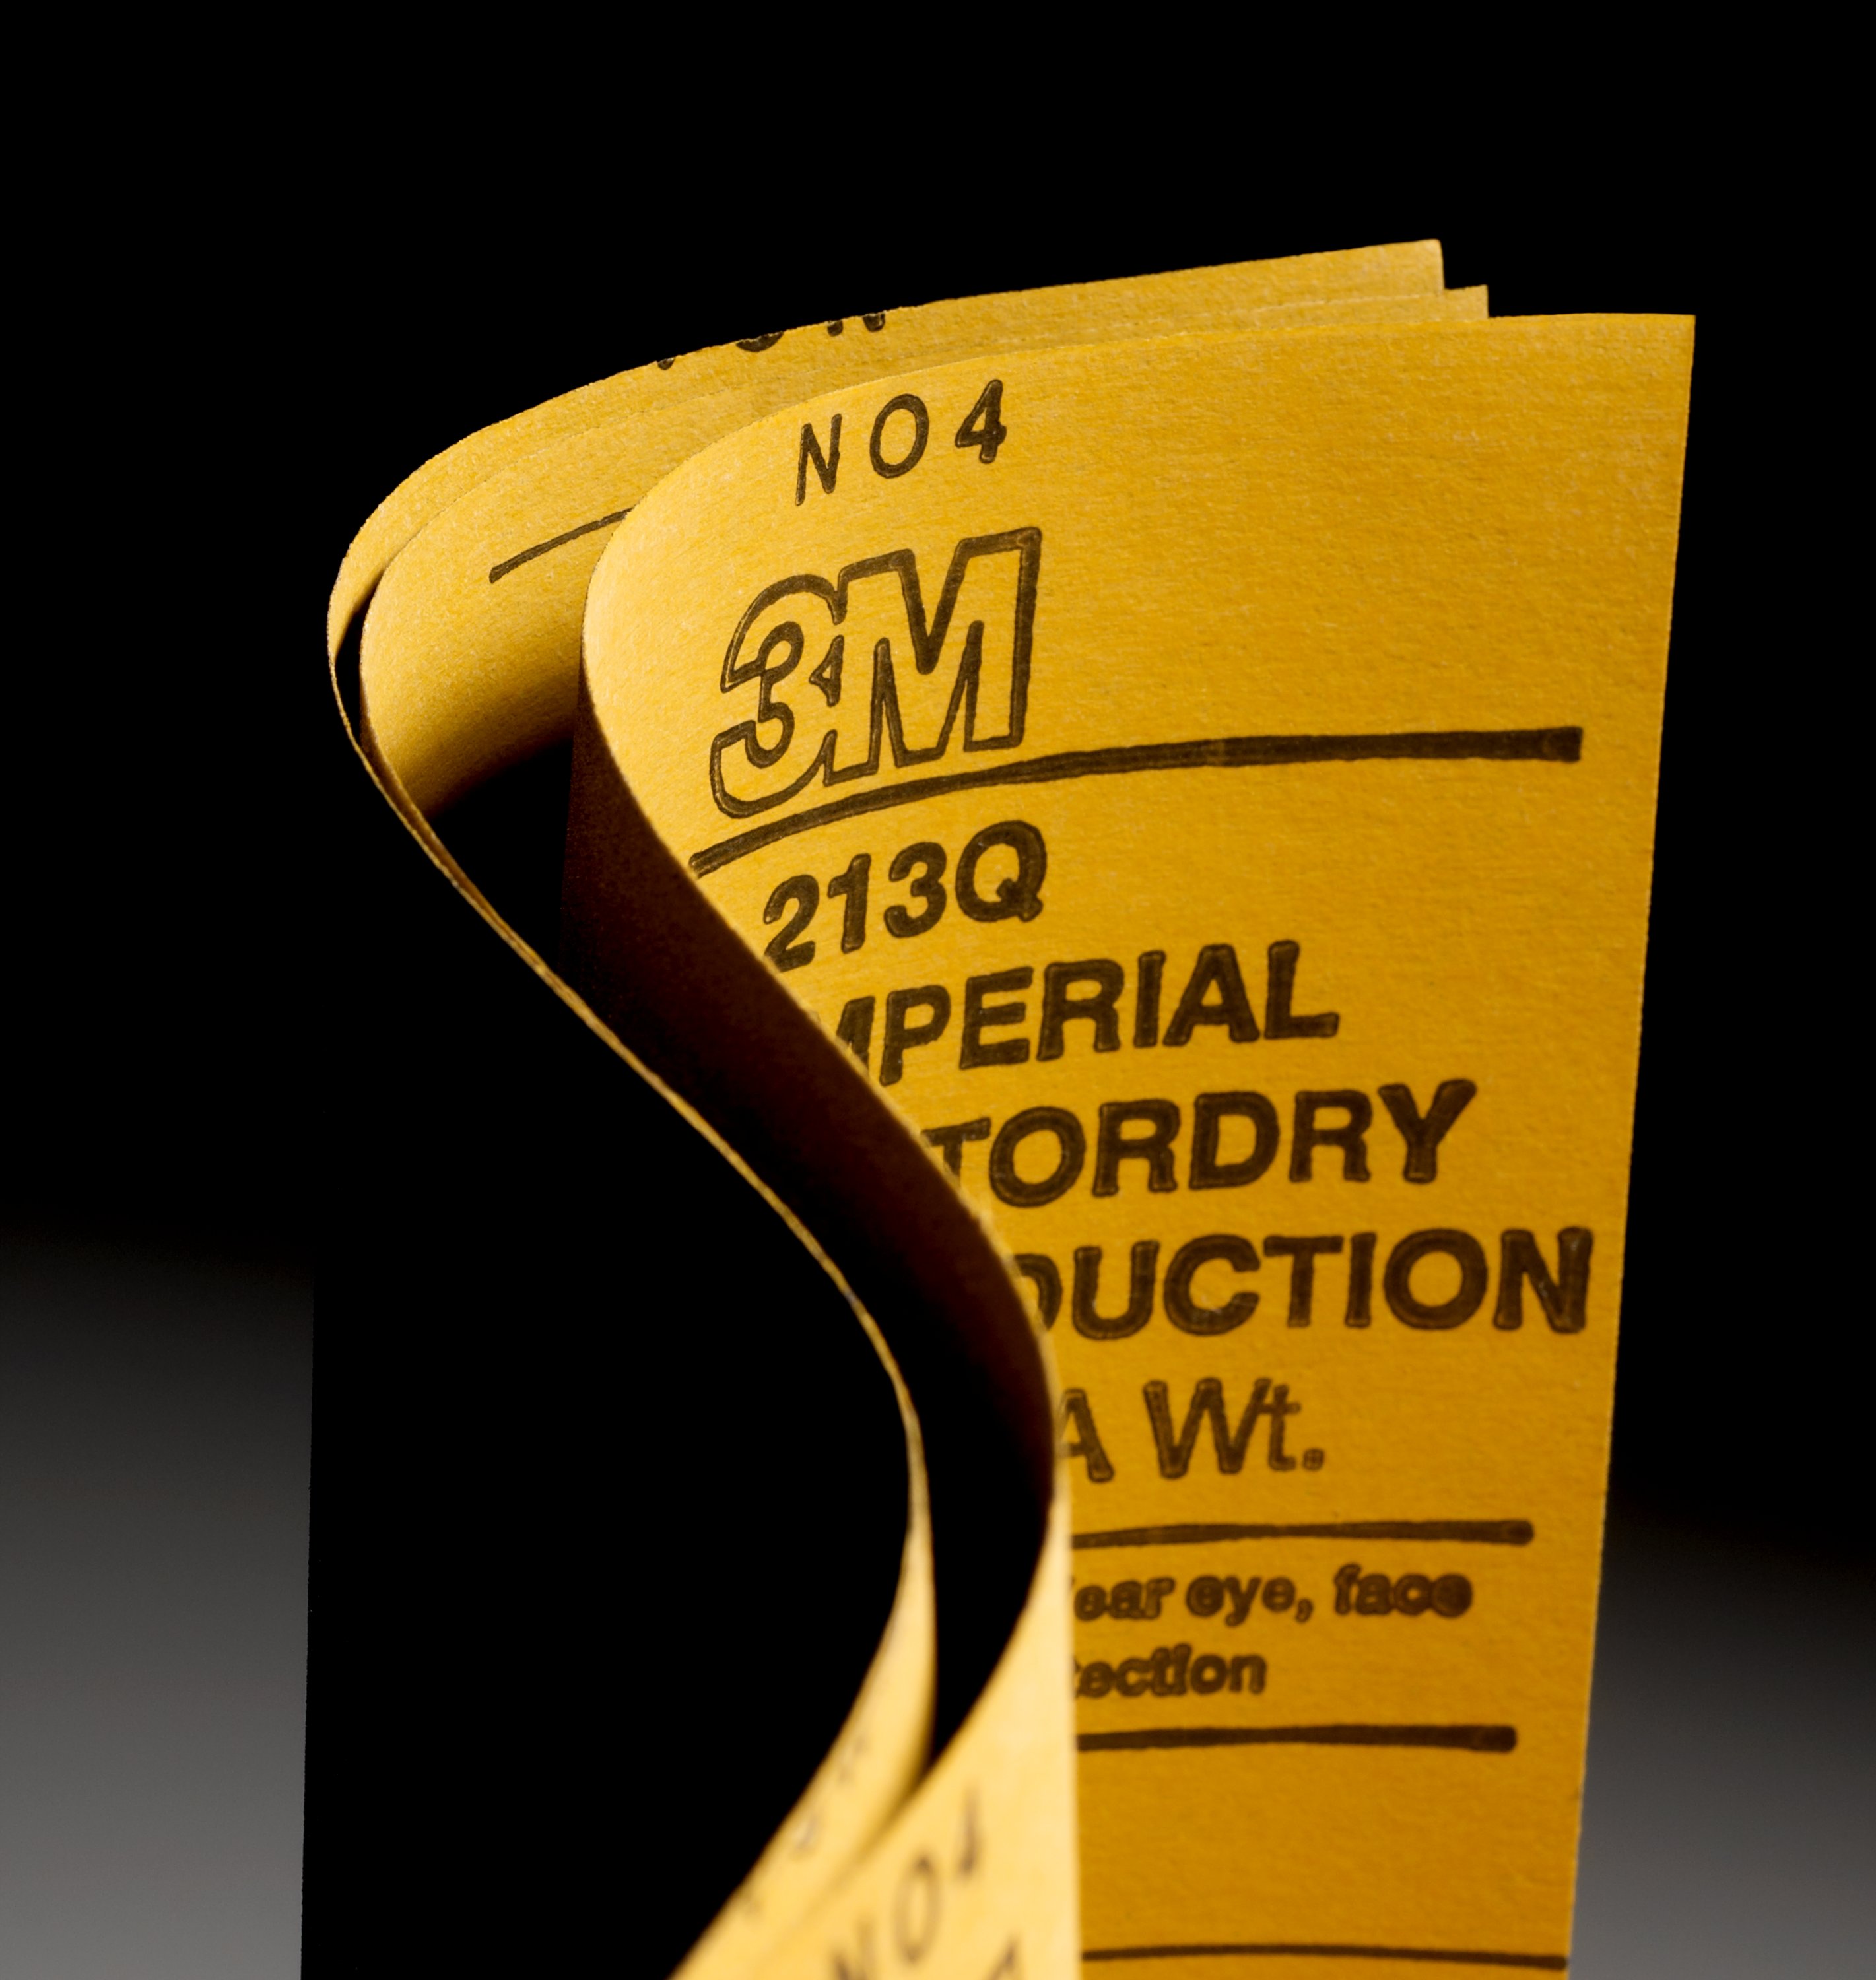 3M™ Wetordry™ Abrasive Sheet 213Q is best suited for metal sanding and finishing thanks to its versatility and fast cutting abrasive material.